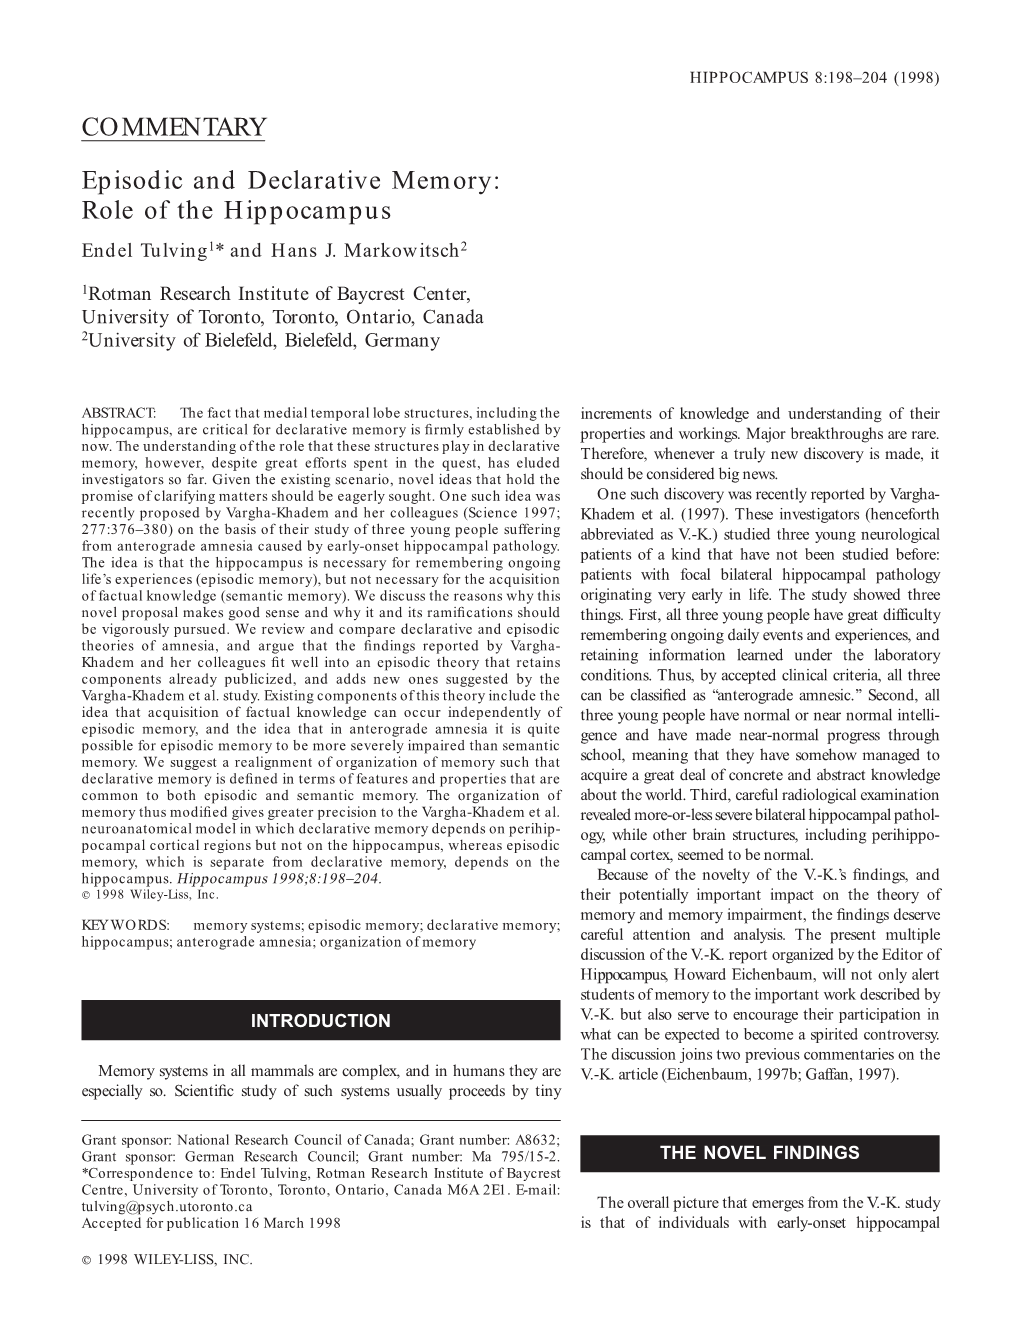 Episodic and Declarative Memory: Role of the Hippocampus